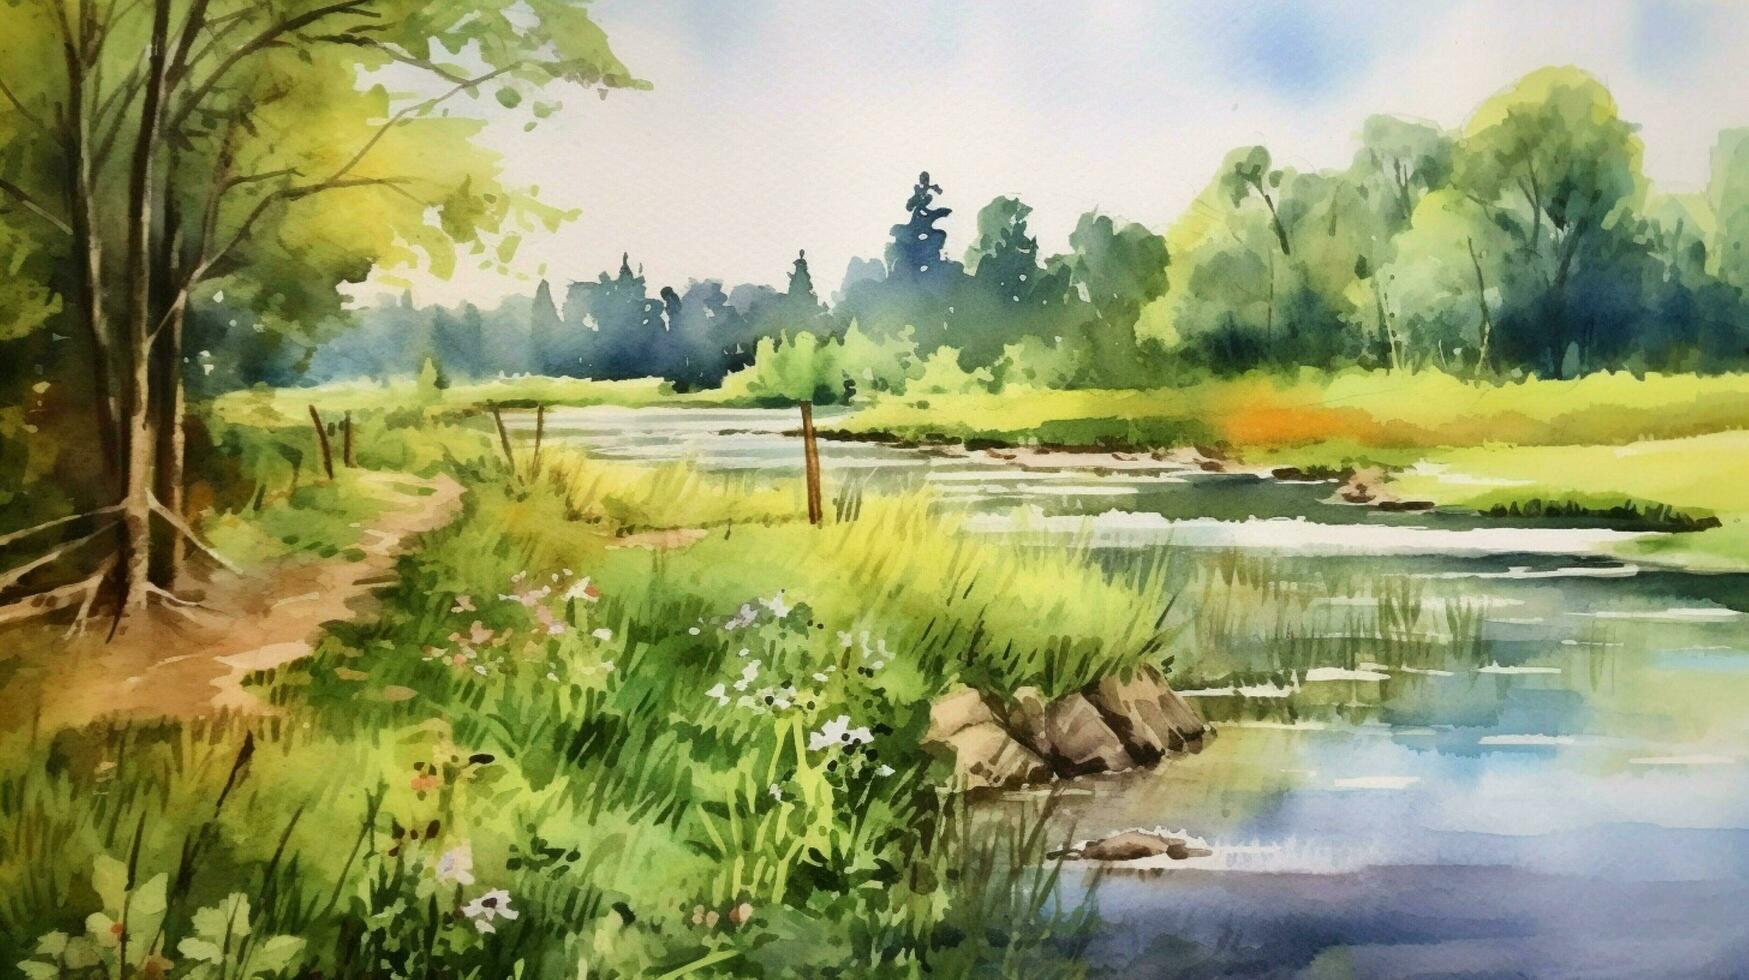 tranquil summer scenery a watercolor painting photo